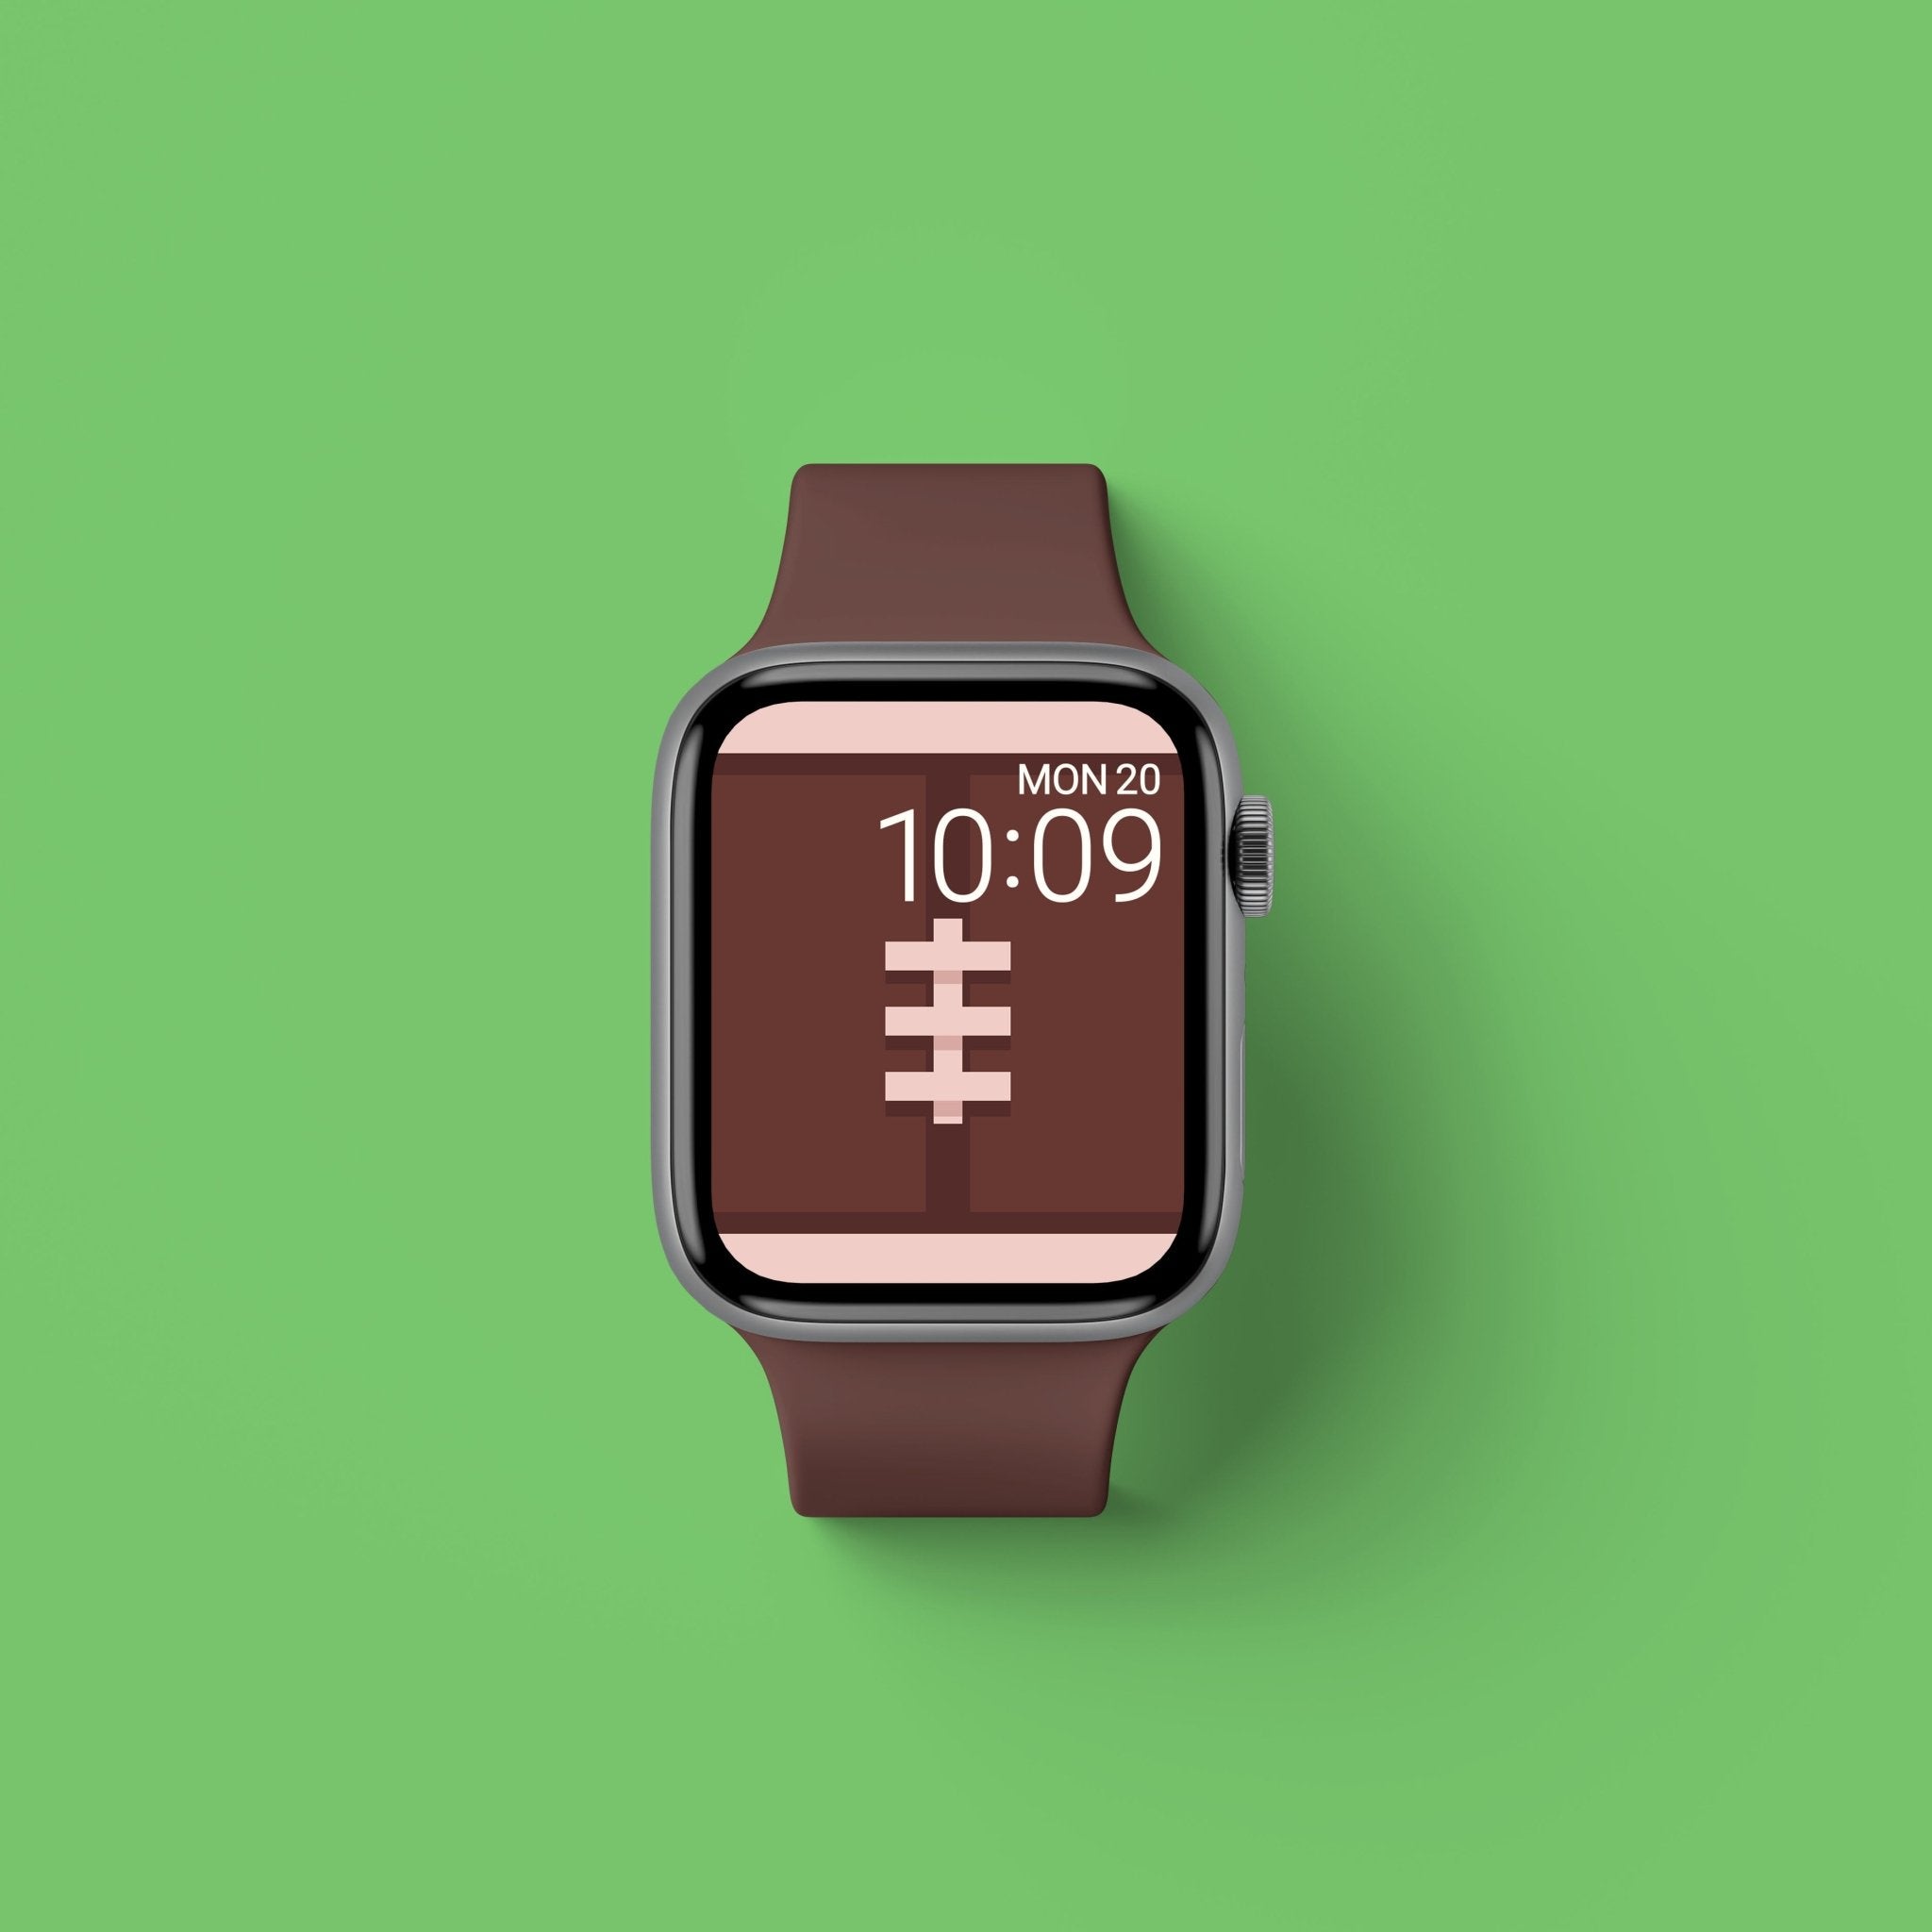 Wallpapers of the Month| Feb | Apple Watch Wallpapers - 4 Pack - Buckle and Band - FEBWP